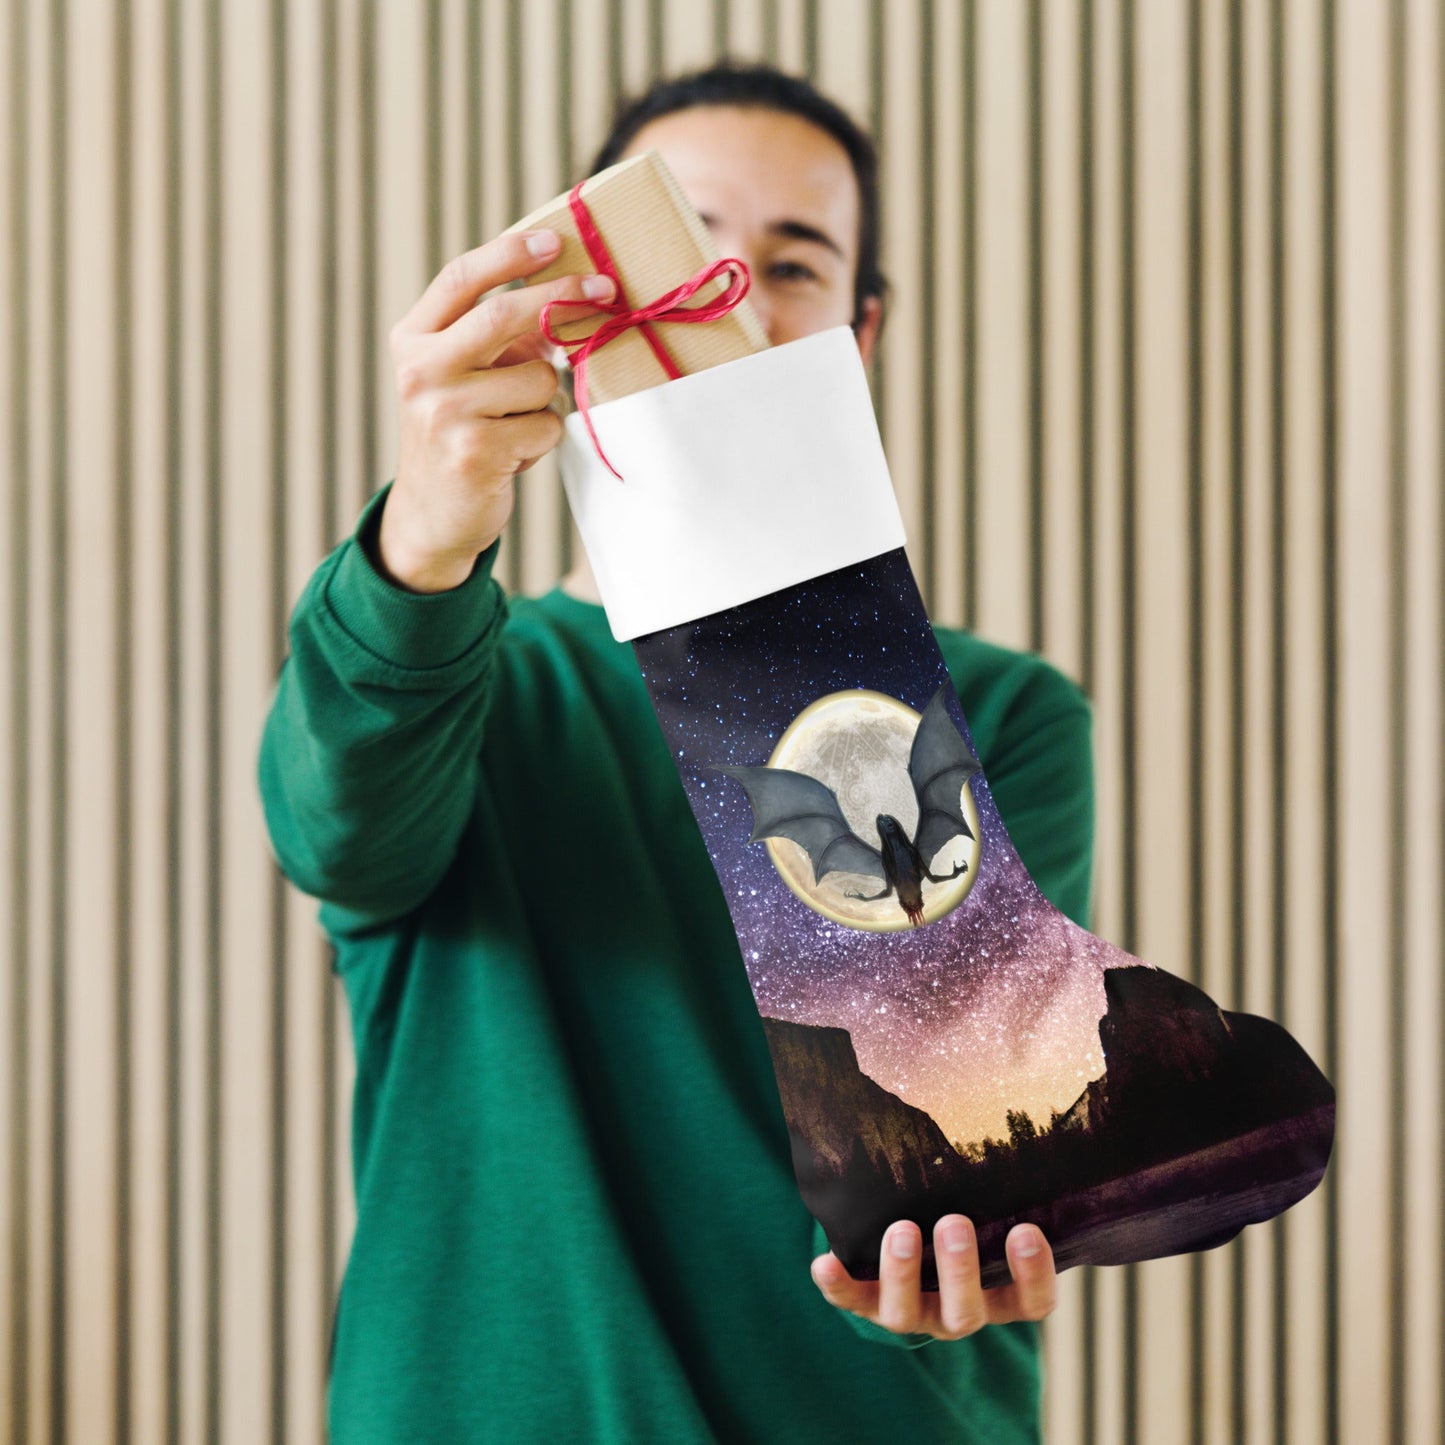 The Baby-Eater Christmas Stocking - Manananggal Takes Flight - Spectral Ink Shop - Holiday Stockings -7046915_17599